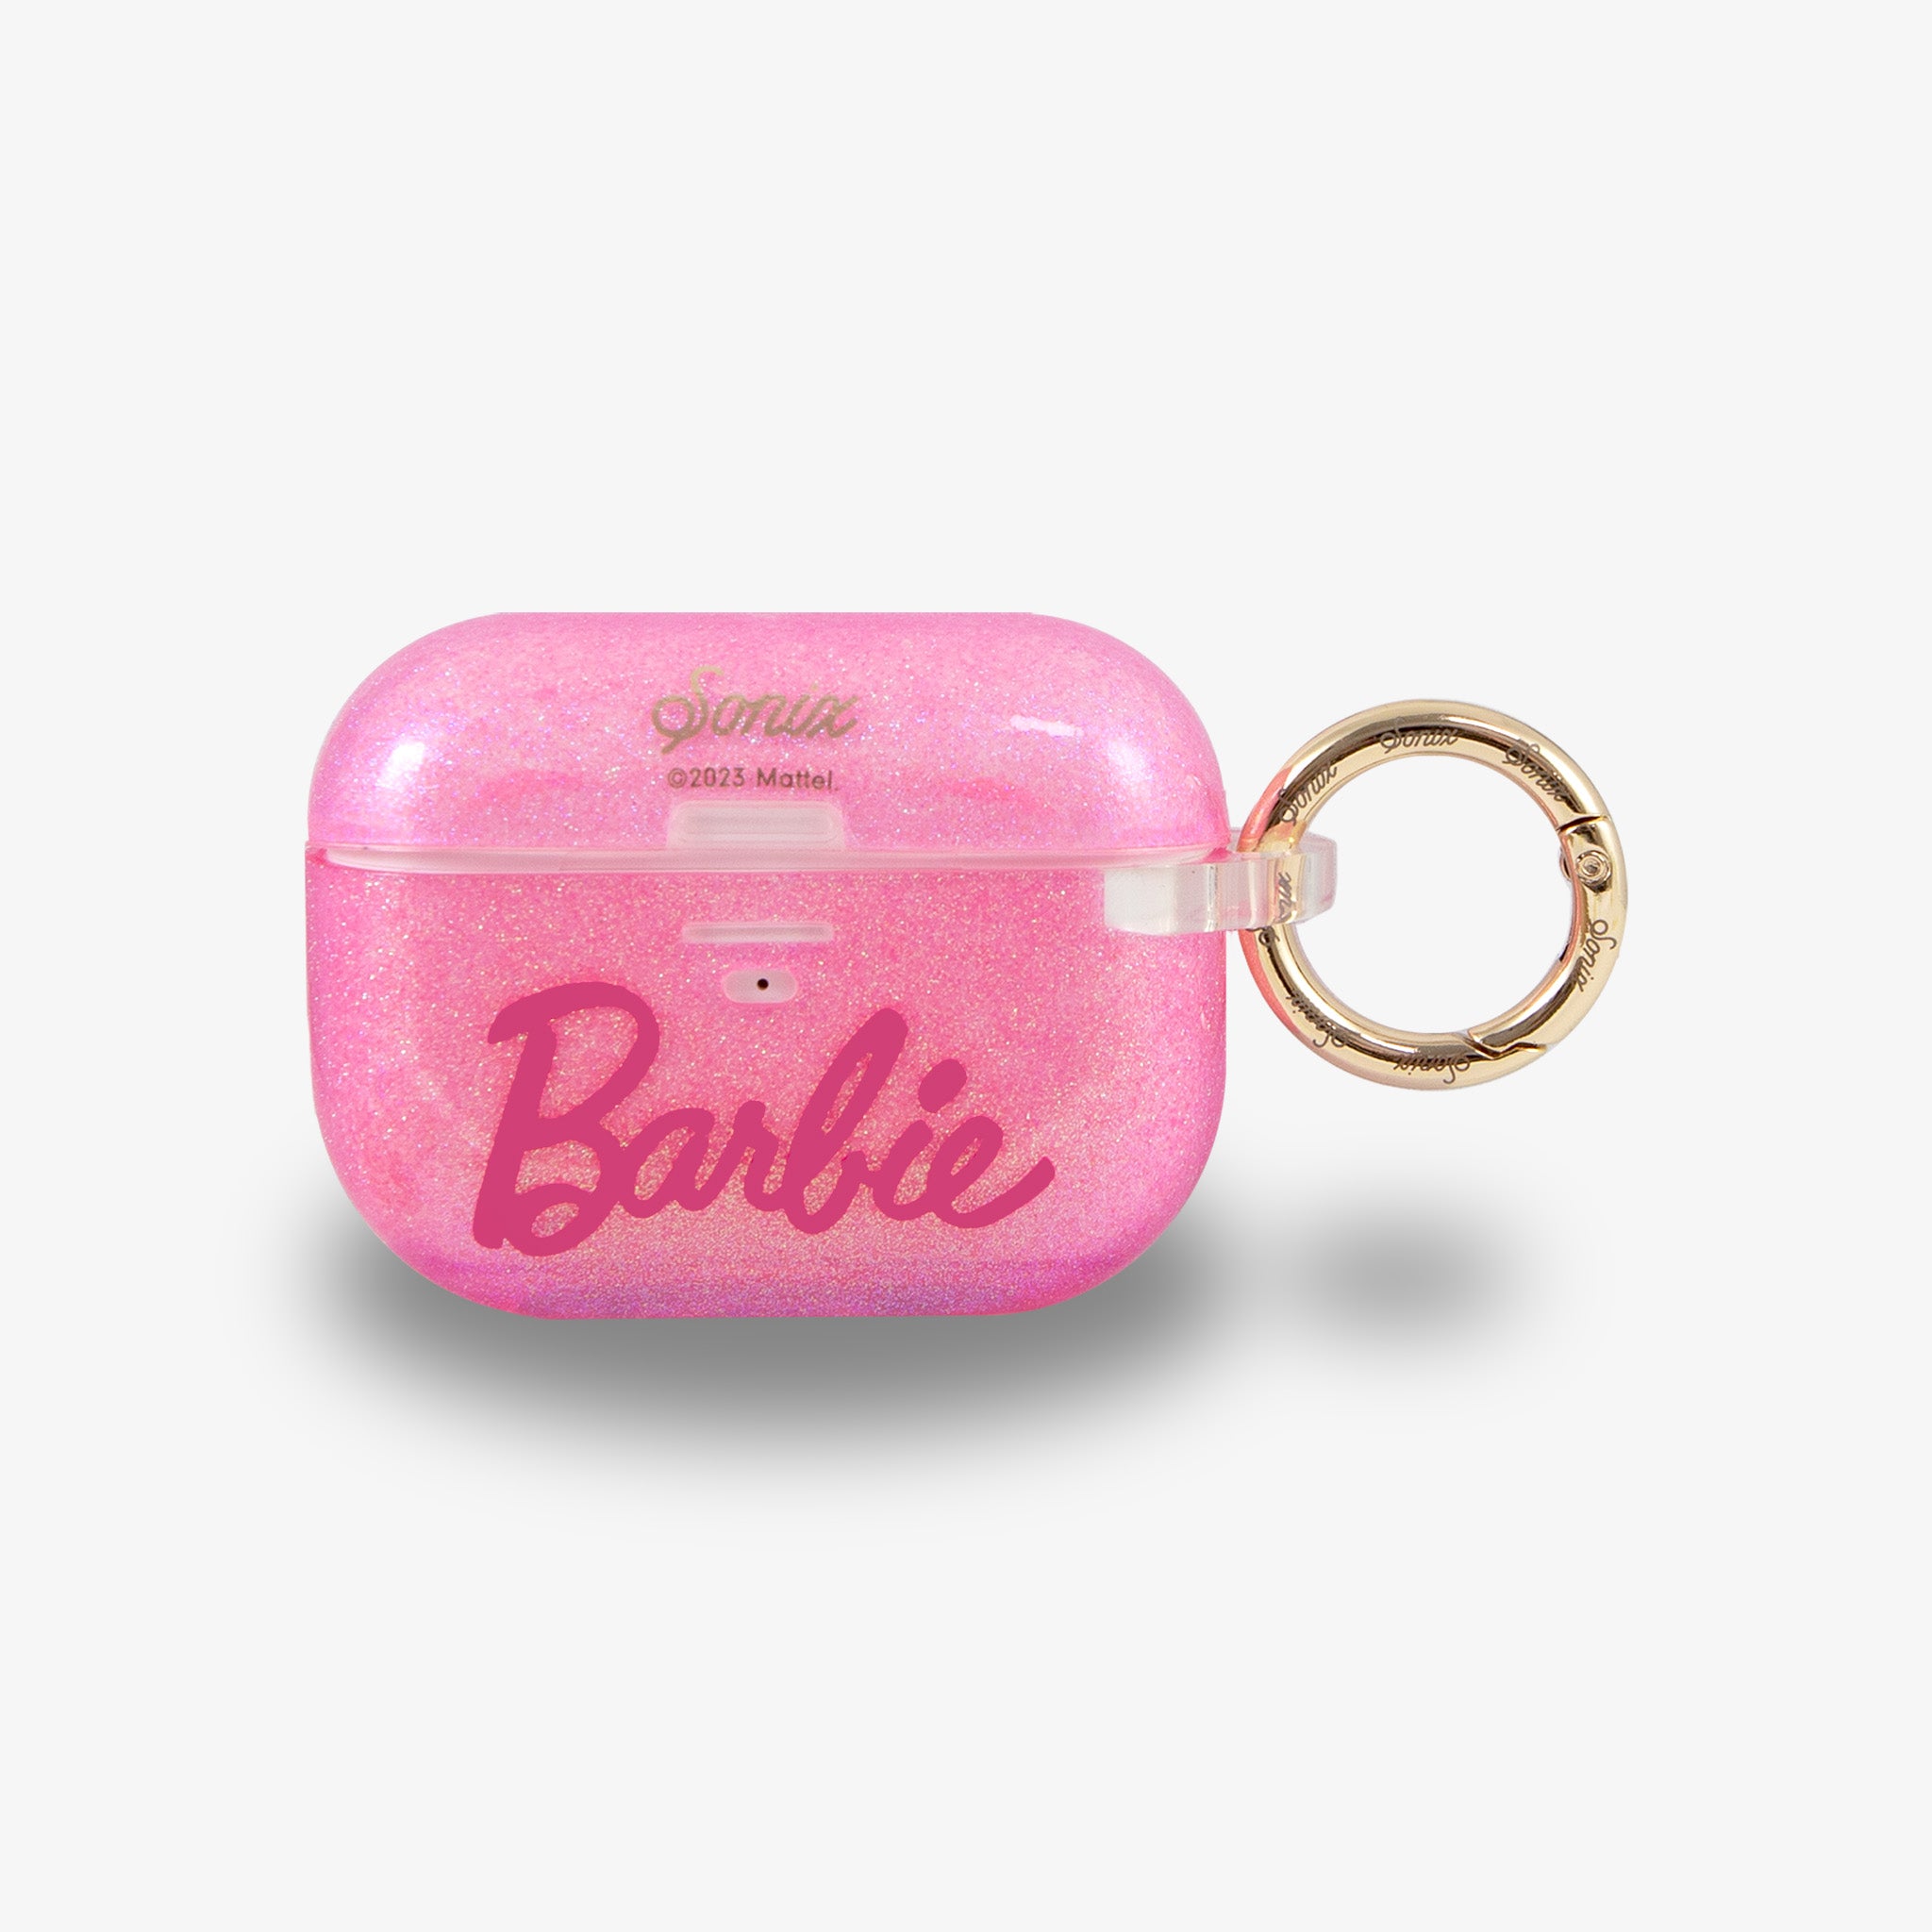 Barbie tumbler (Mexico Release) with a free Barbie Tote Bag